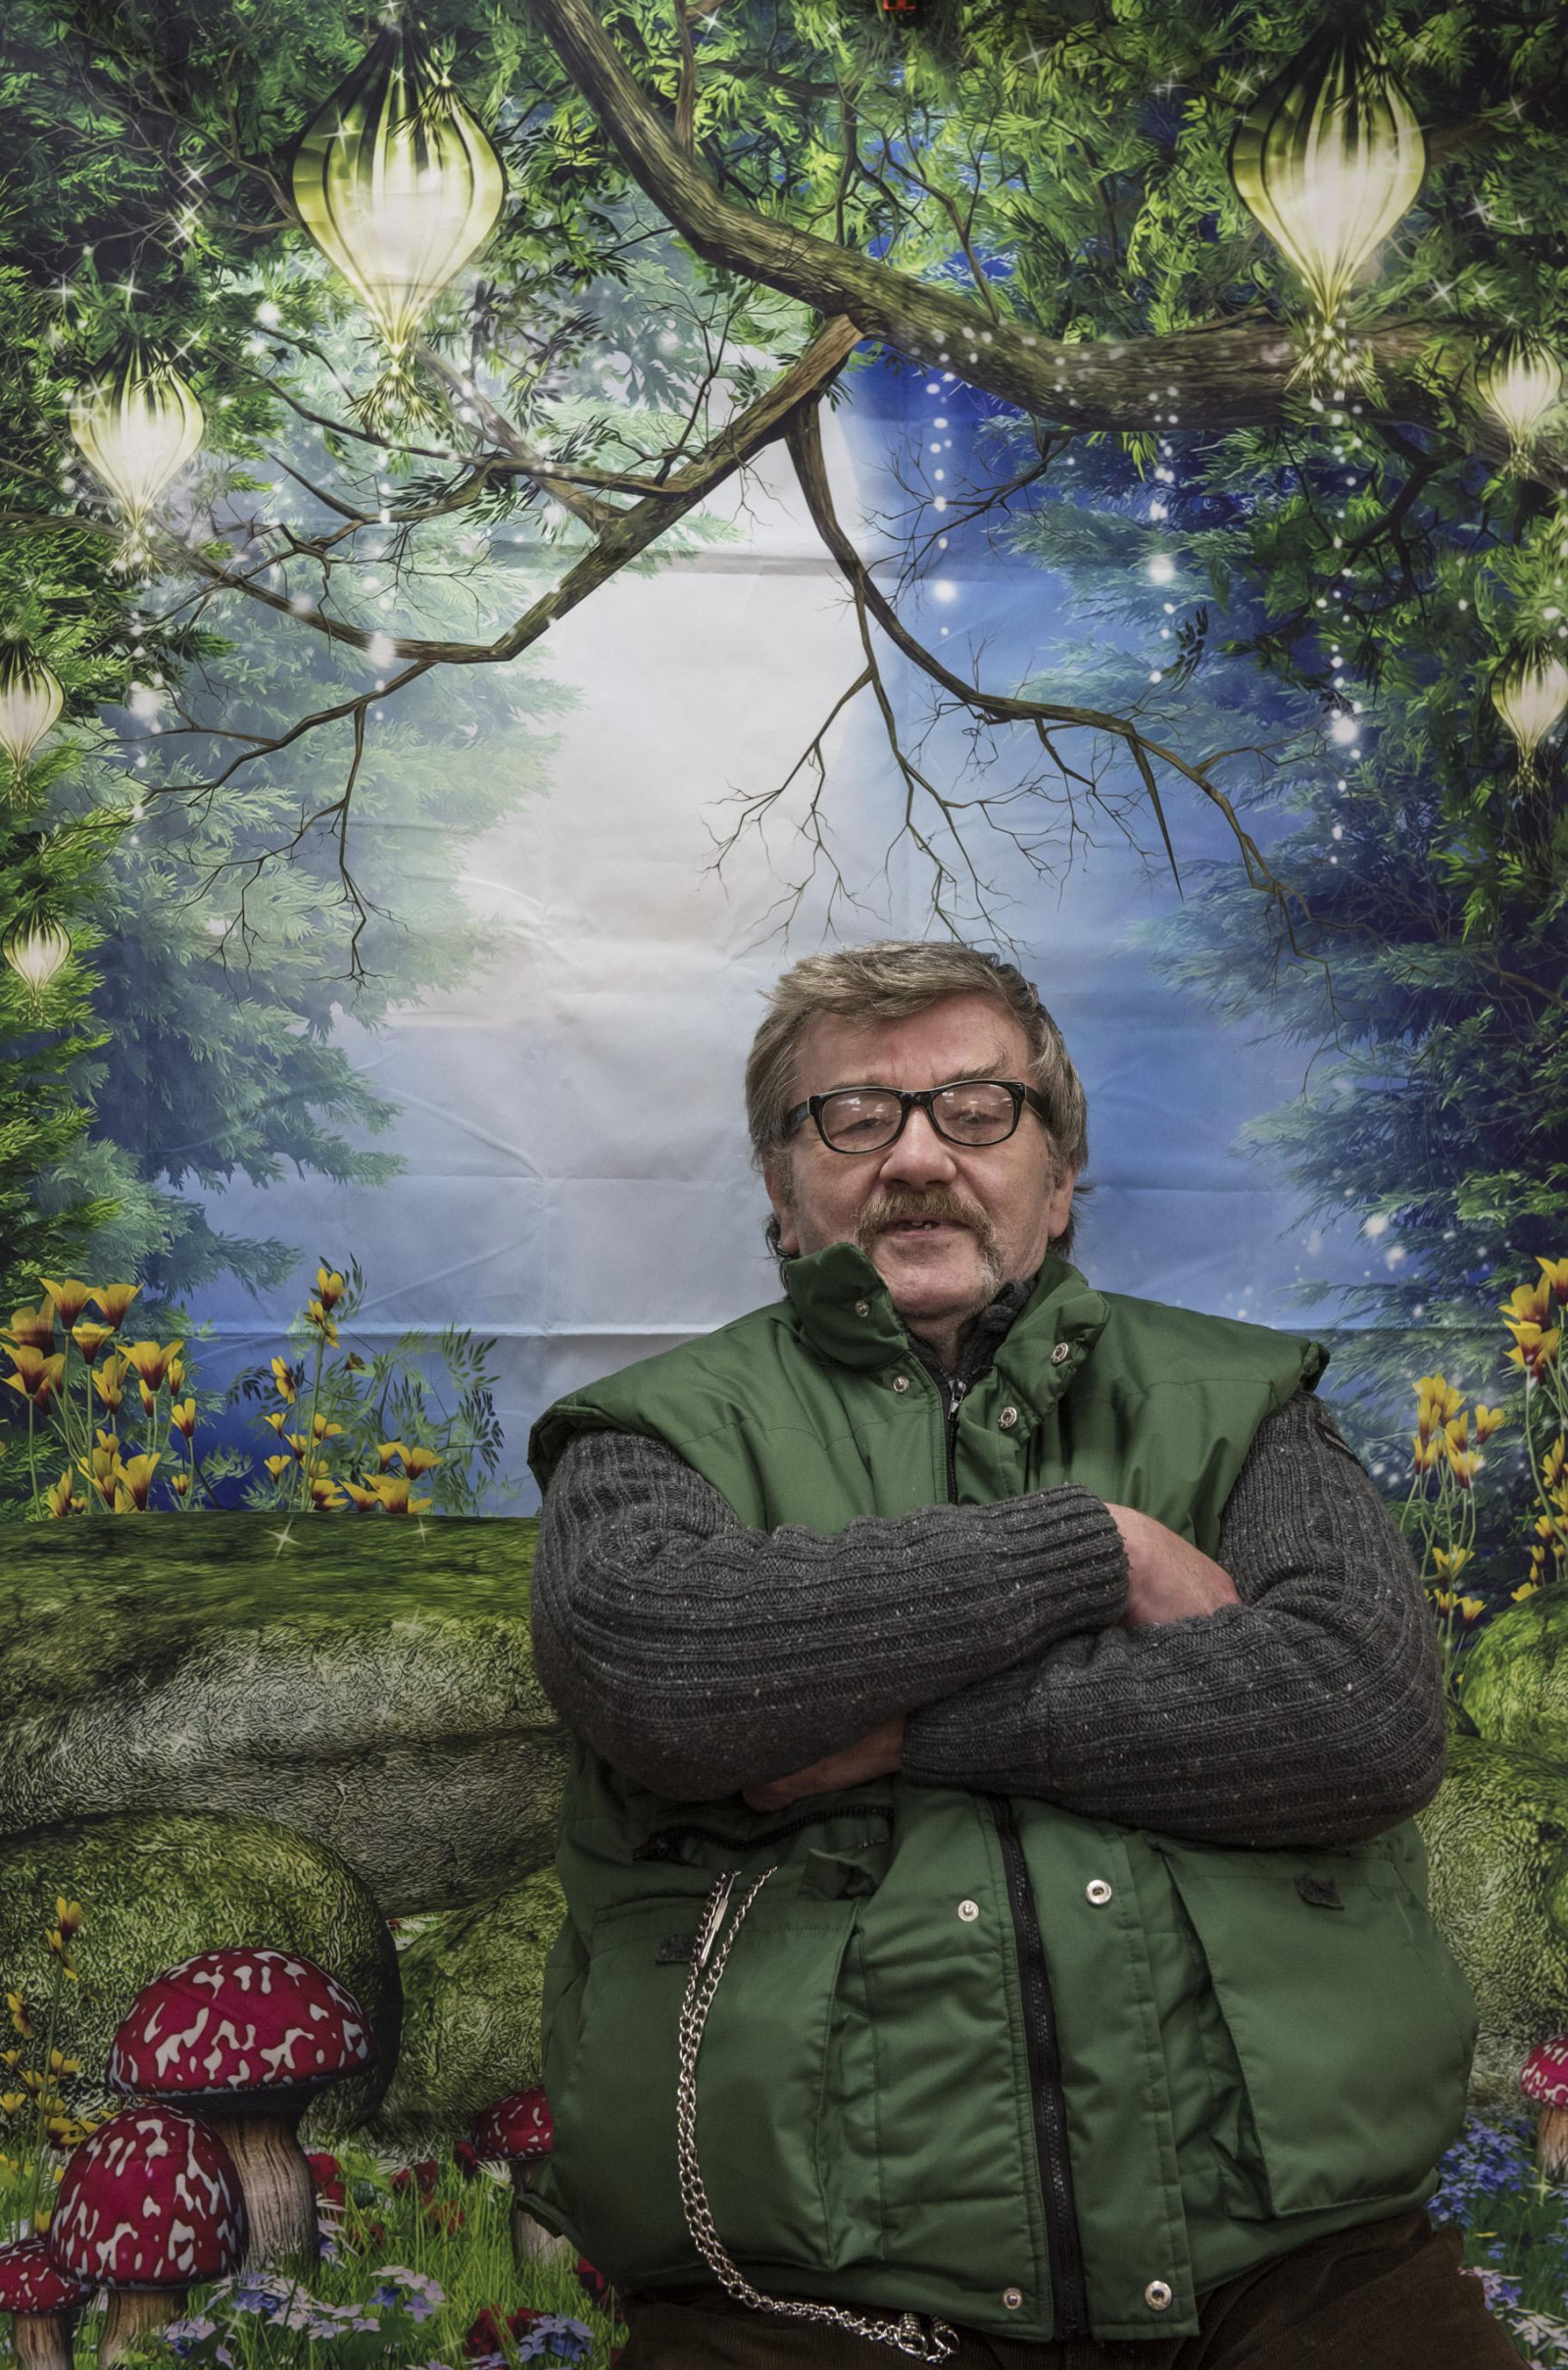 A person with glasses and short dark hair sits with their arms crossed in front of a colourful backdrop. The backdrop is a forest design, with trees, mossy and red and white toadstools.